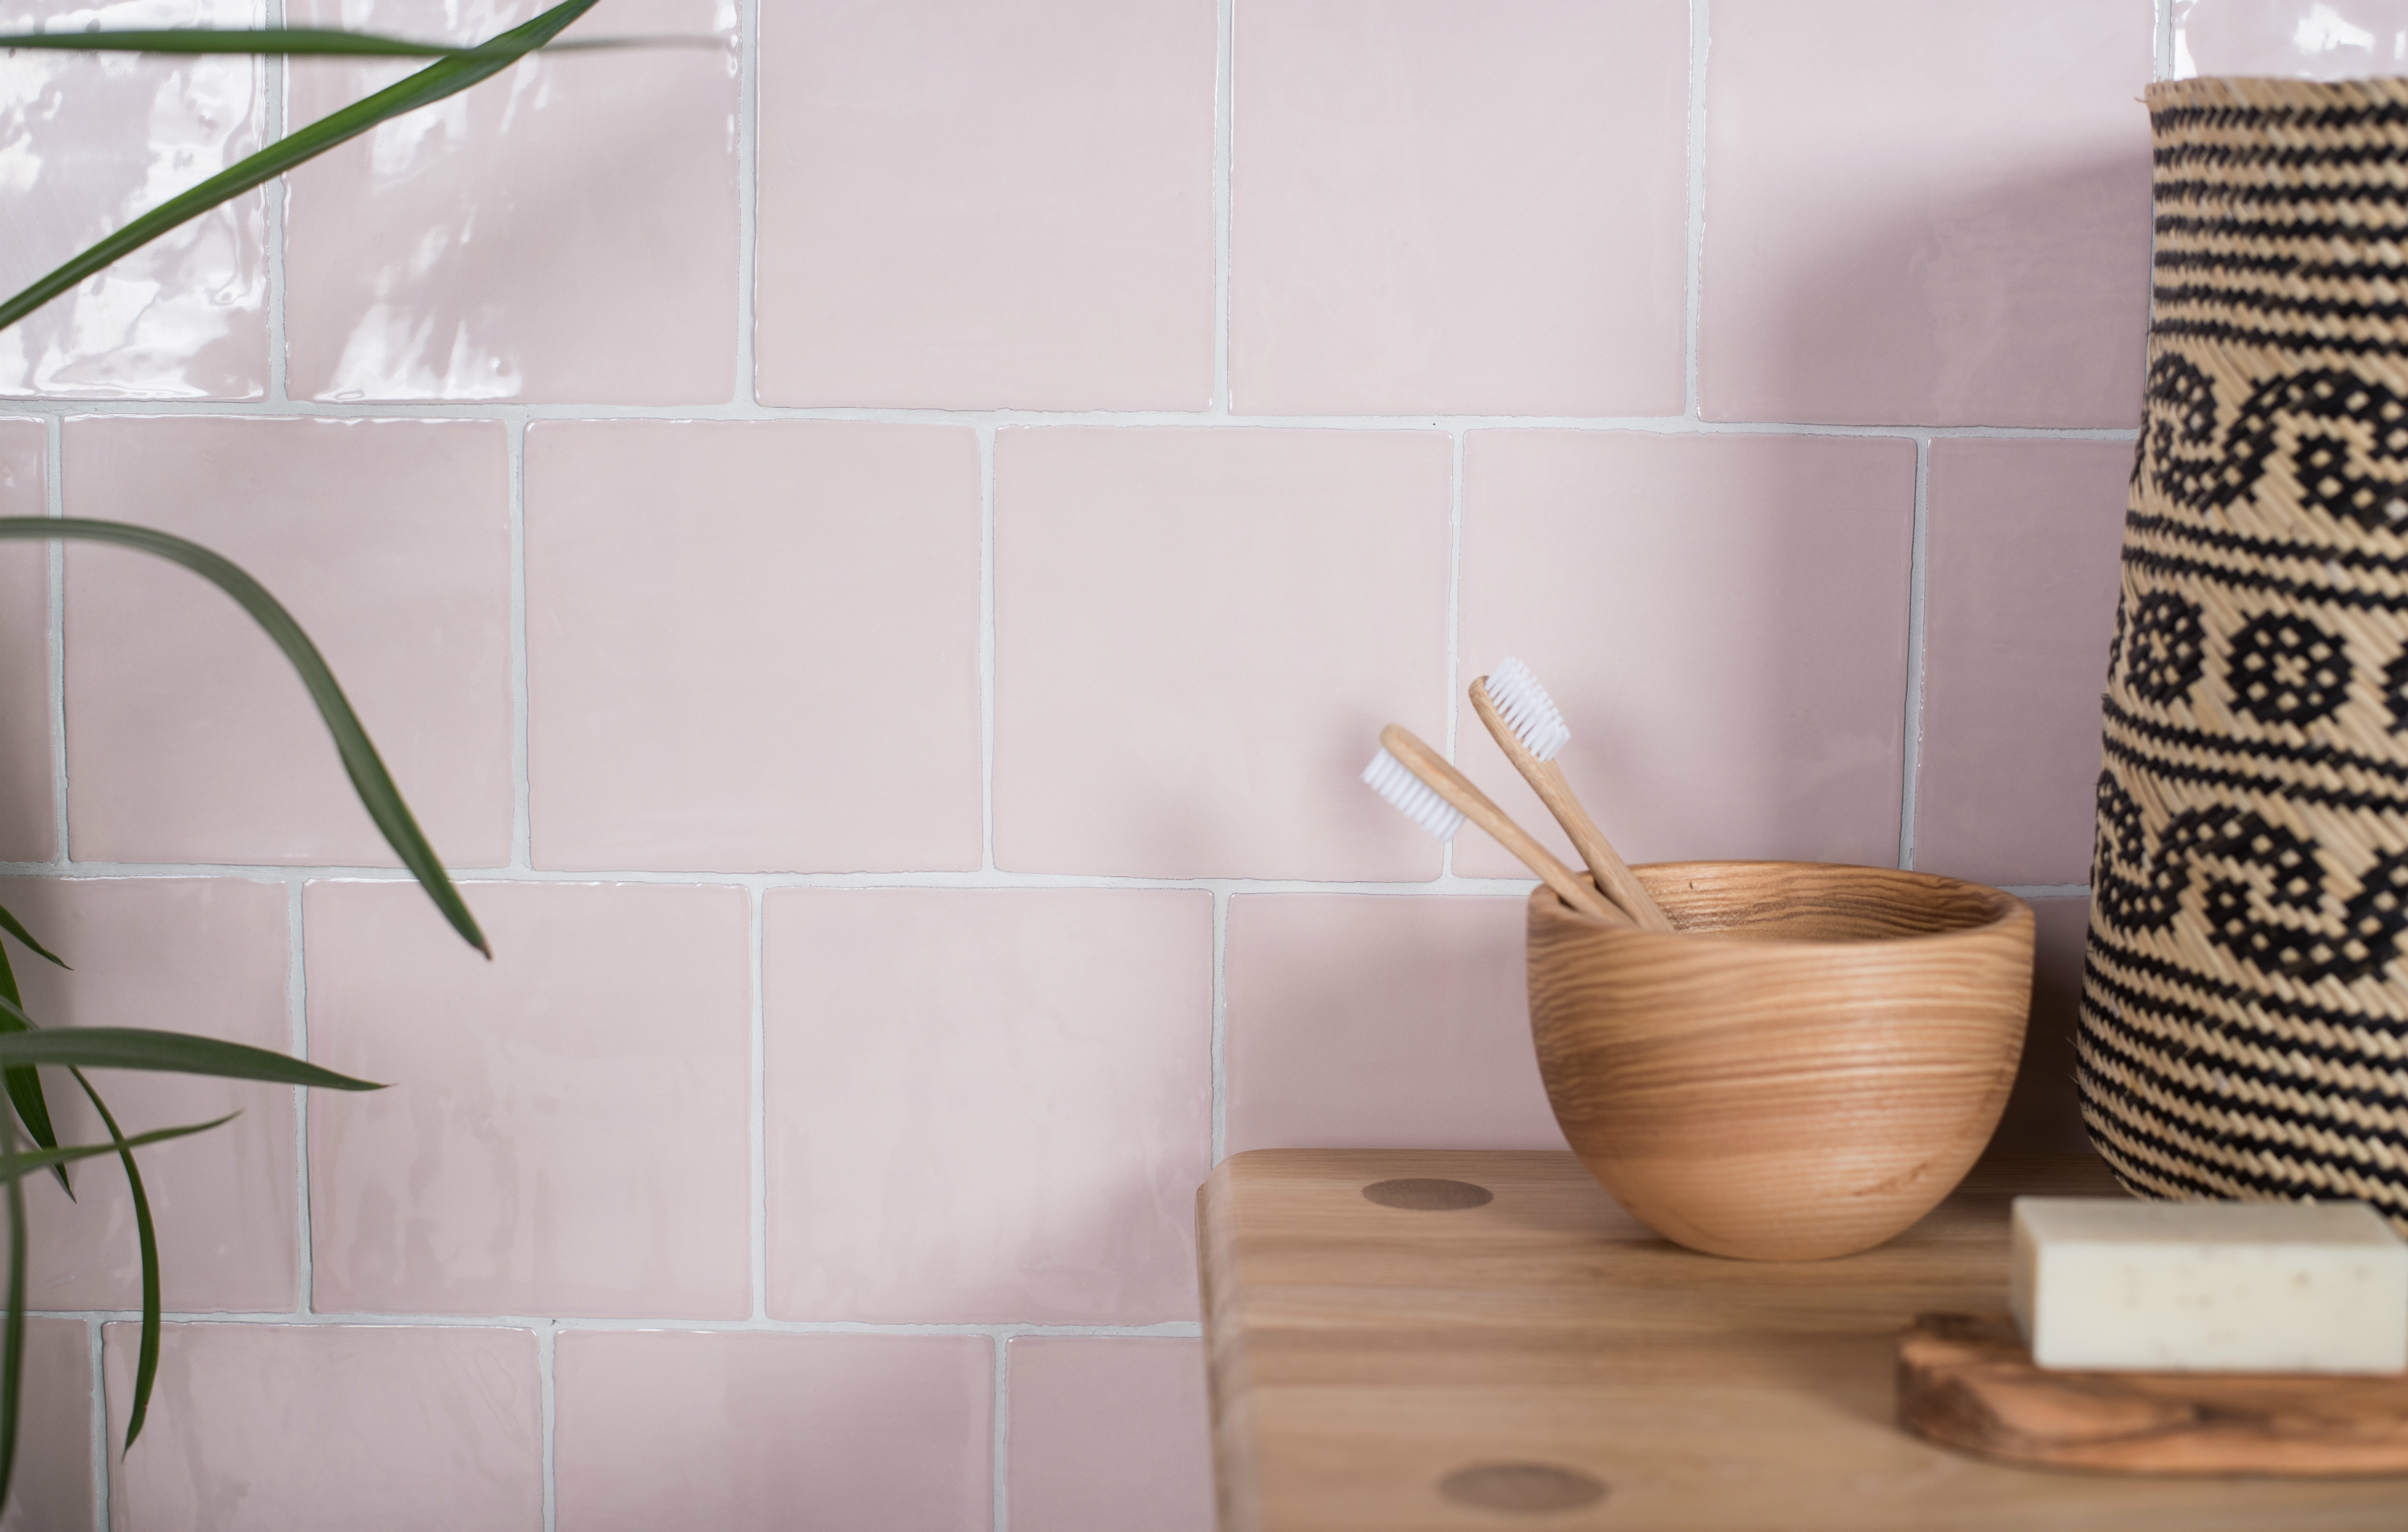 How to clean tile grout: with or